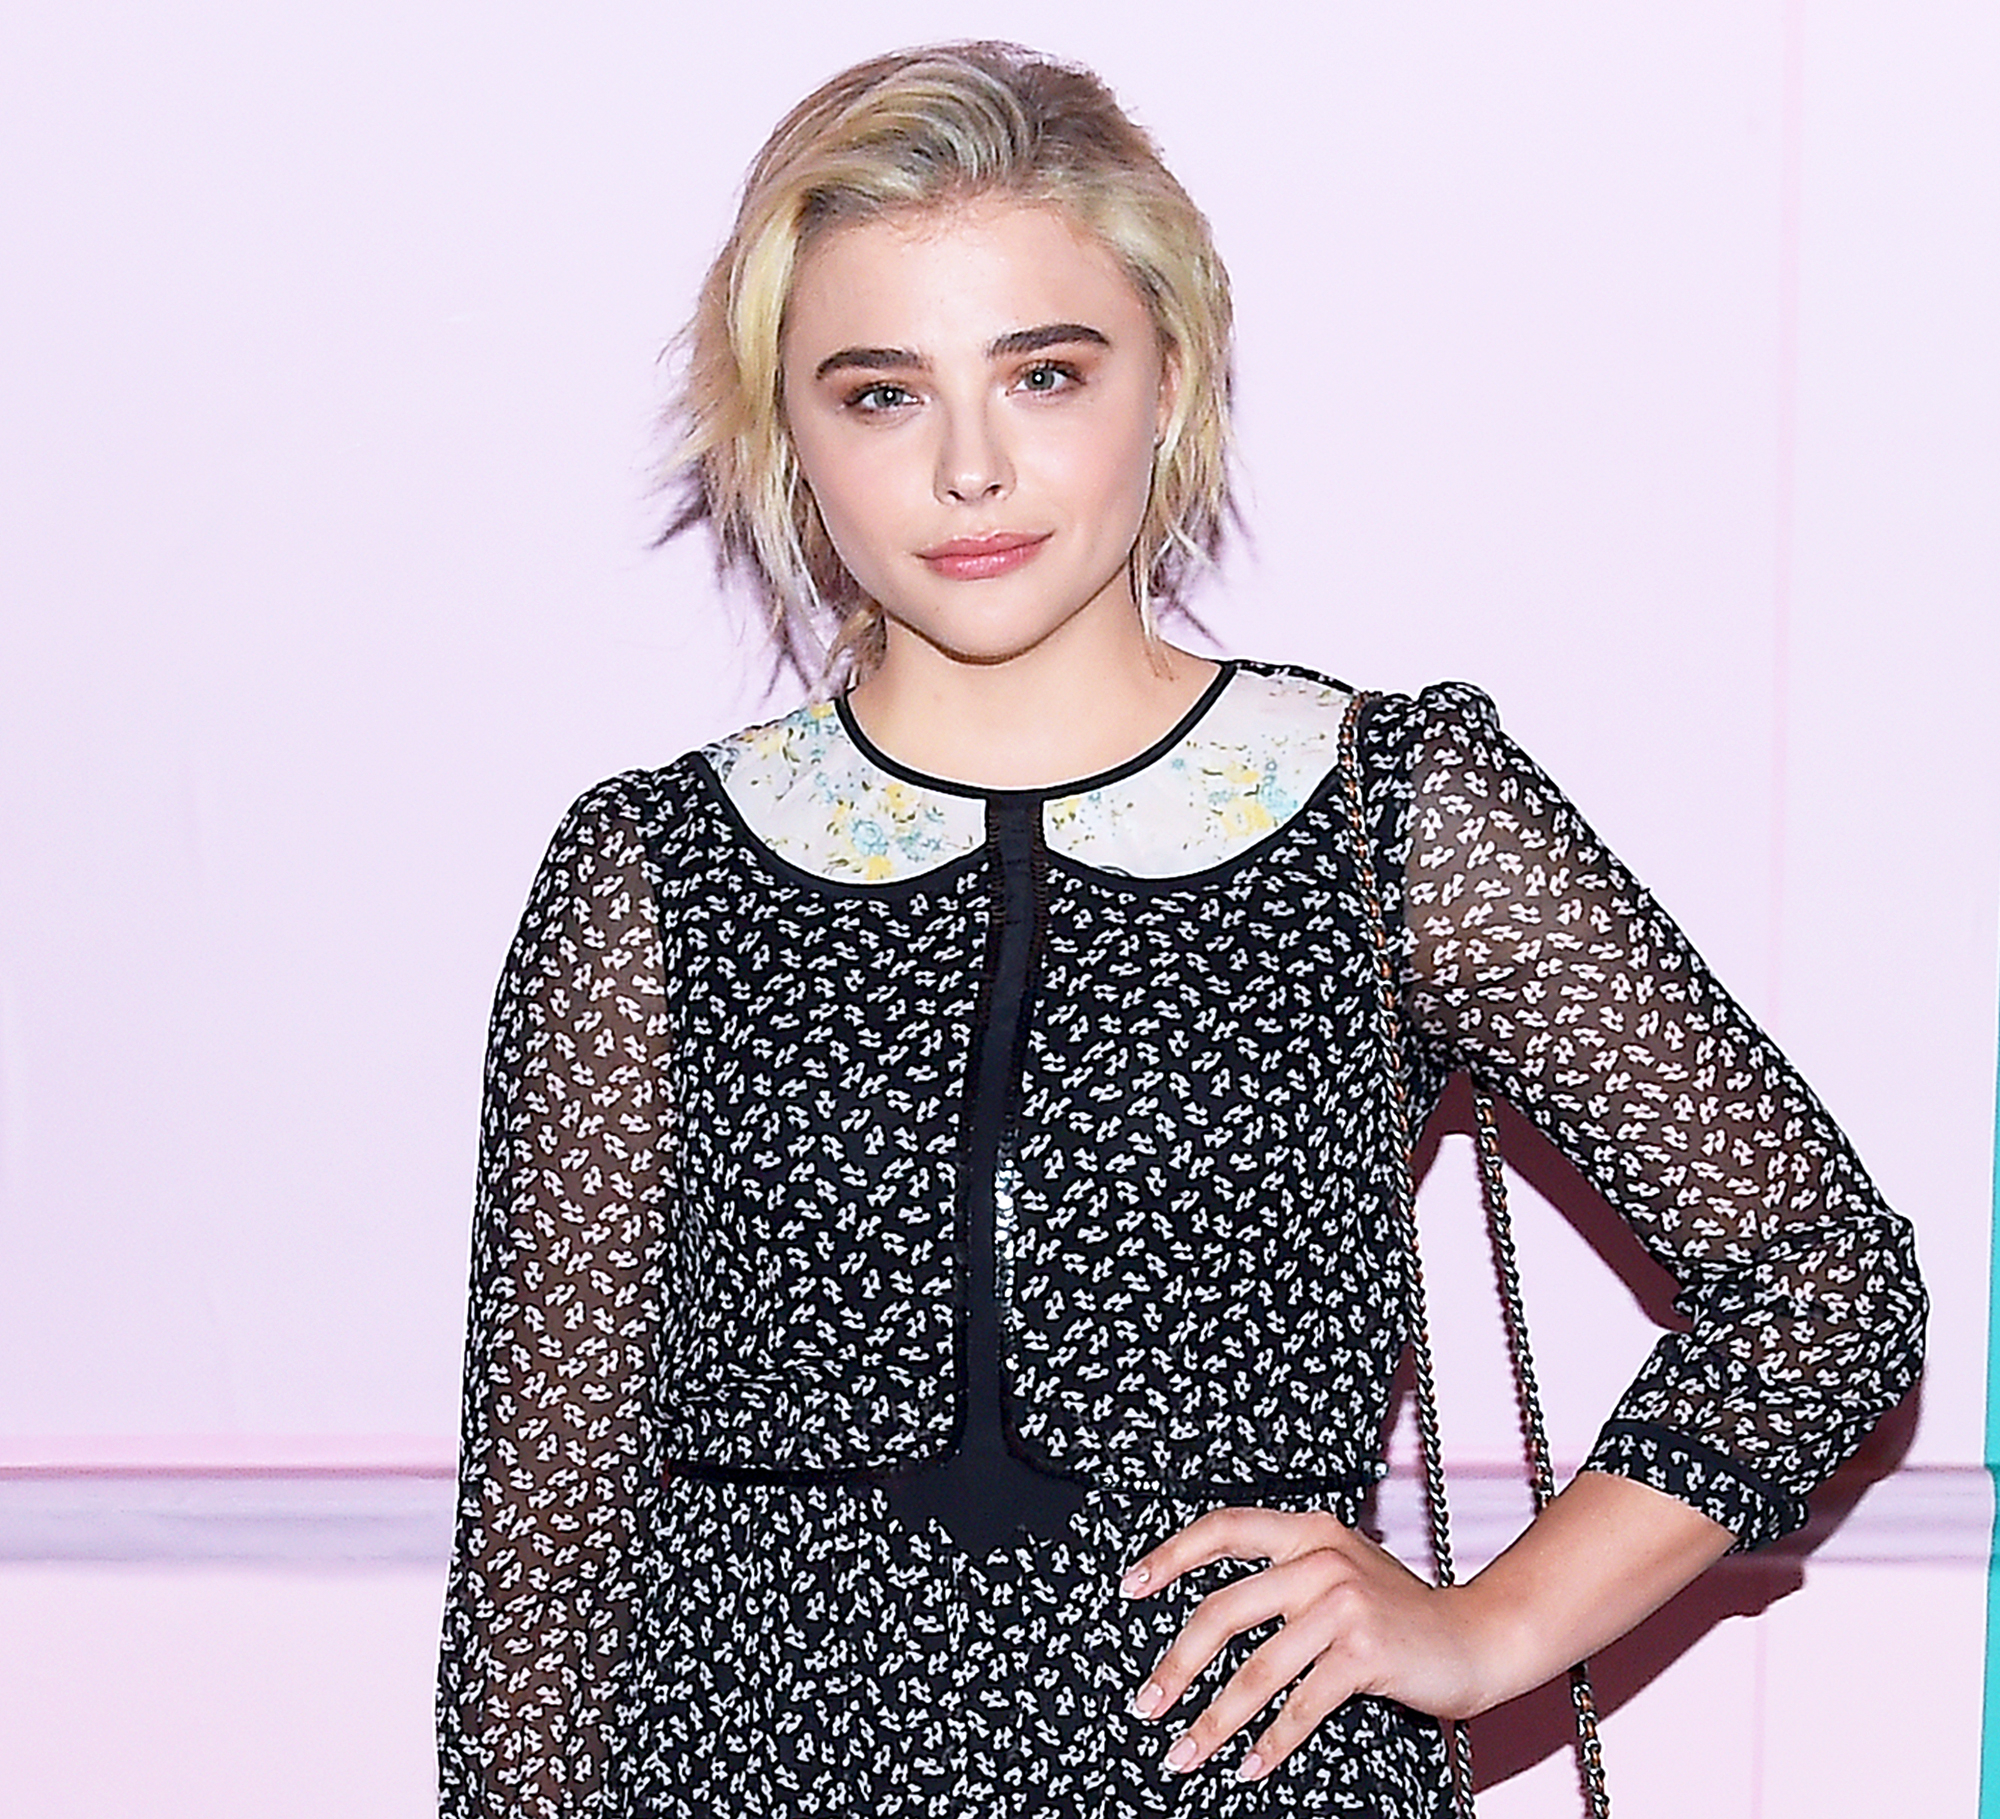 Chloë Grace Moretz's co-star called her 'too big' to date